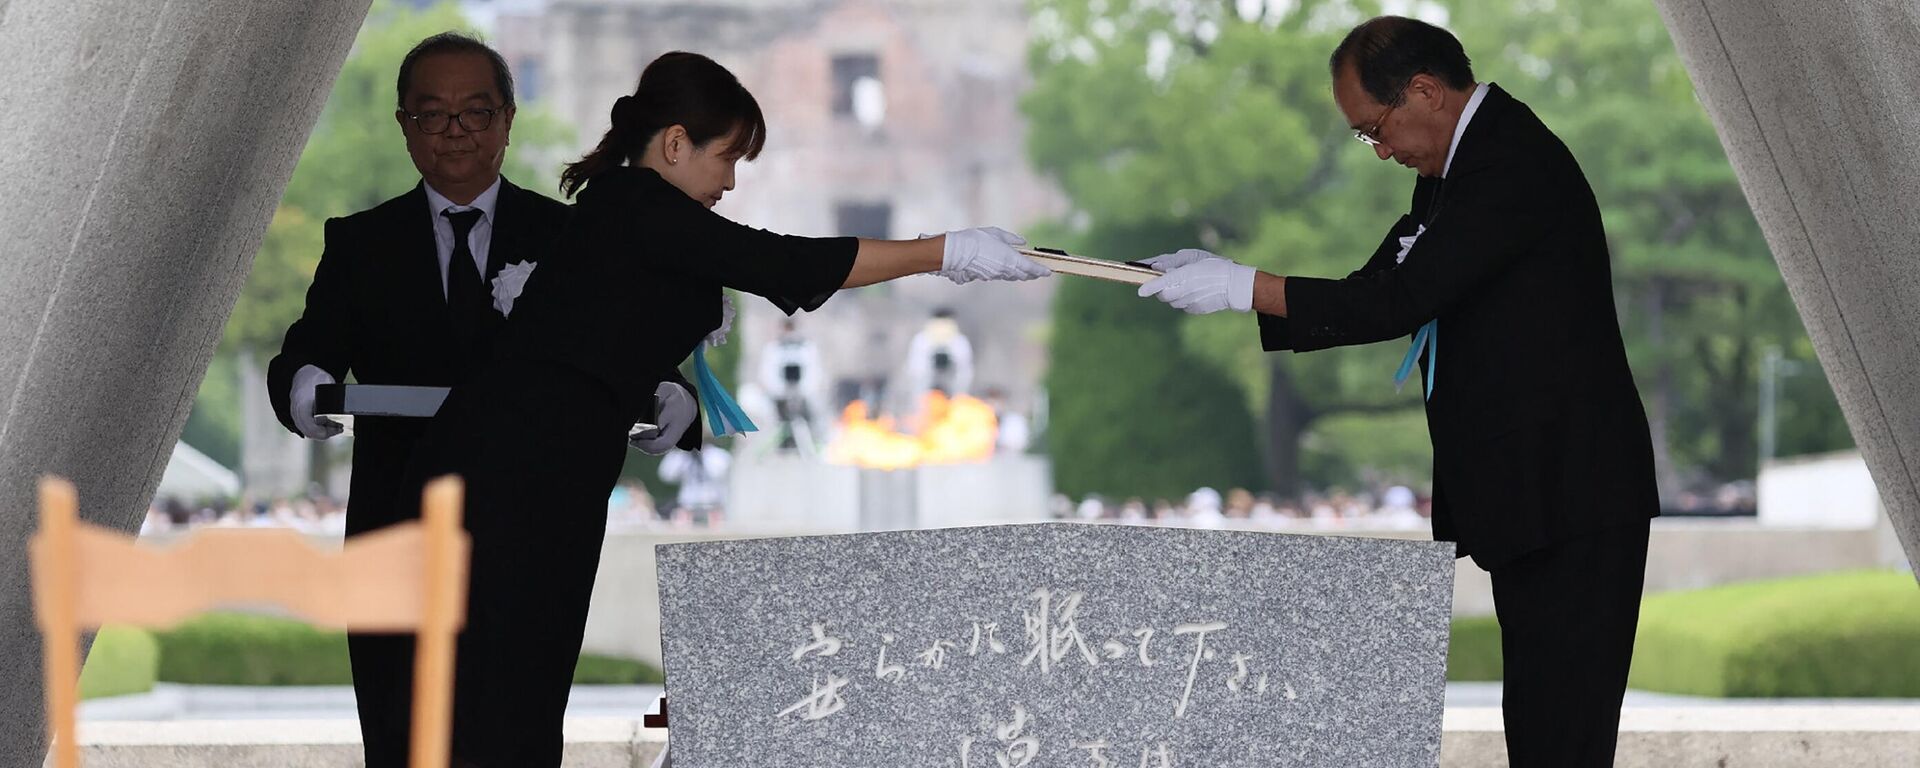 Hiroshima Mayor Kazumi Matsui (R) and representatives of the bereaved families enshrine the list of the atomic bomb victims at the Cenotaph during the annual memorial ceremony at the Hiroshima Peace Memorial Park in Hiroshima on August 6, 2022, to mark 77 years since the world's first atomic bomb attack. - Sputnik International, 1920, 06.08.2022